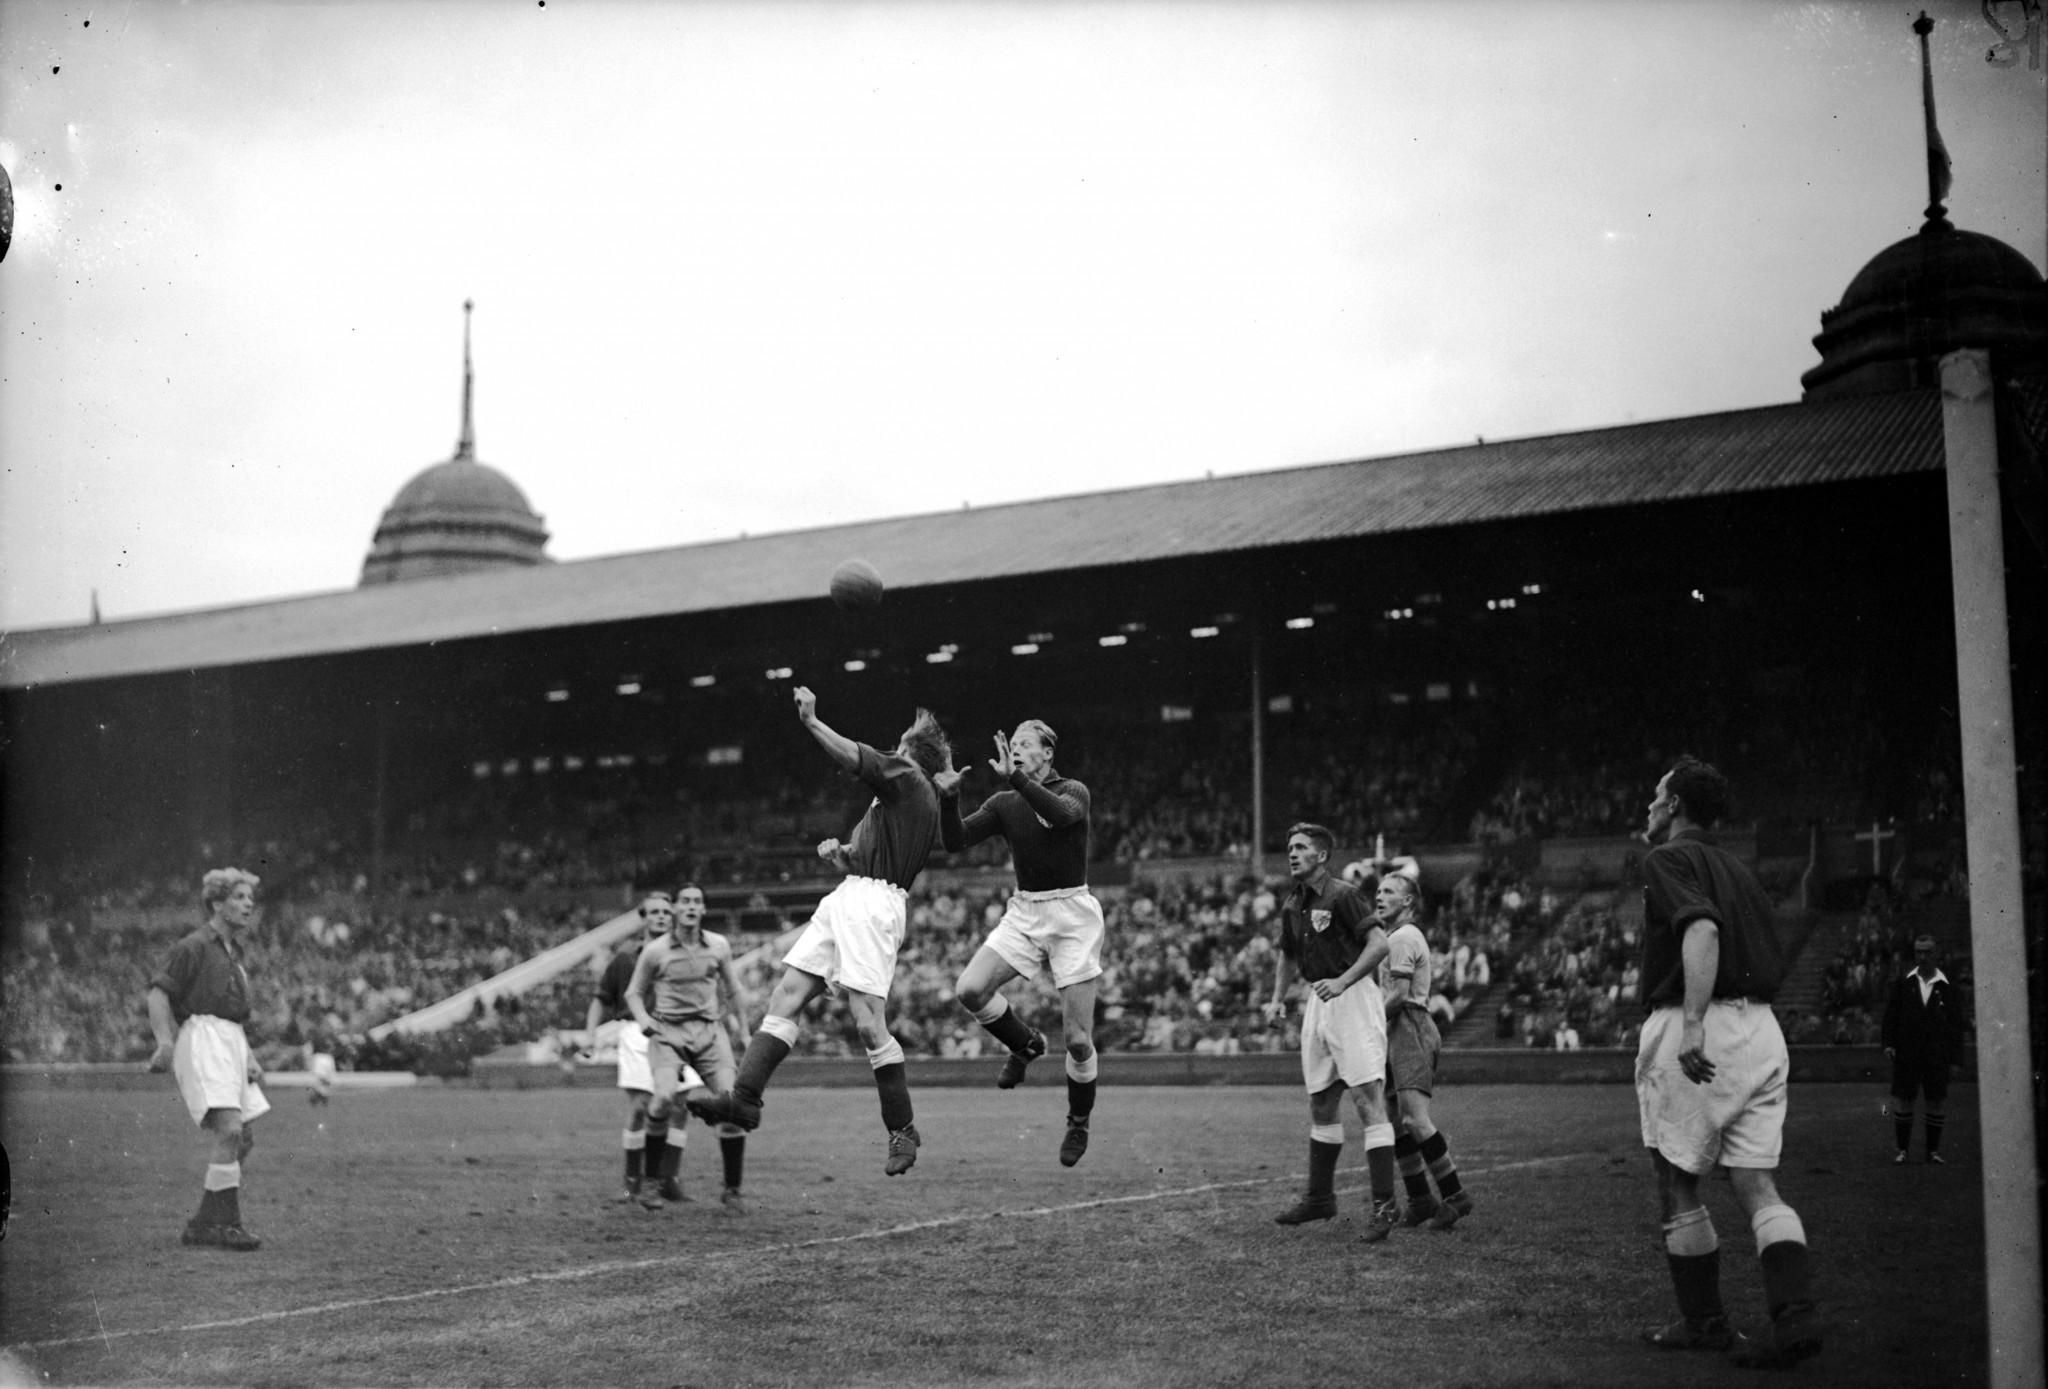 Sweden defeated neighbours Denmark 4-2 to reach the final of the Olympic football tournament at London 1948 ©Getty Images